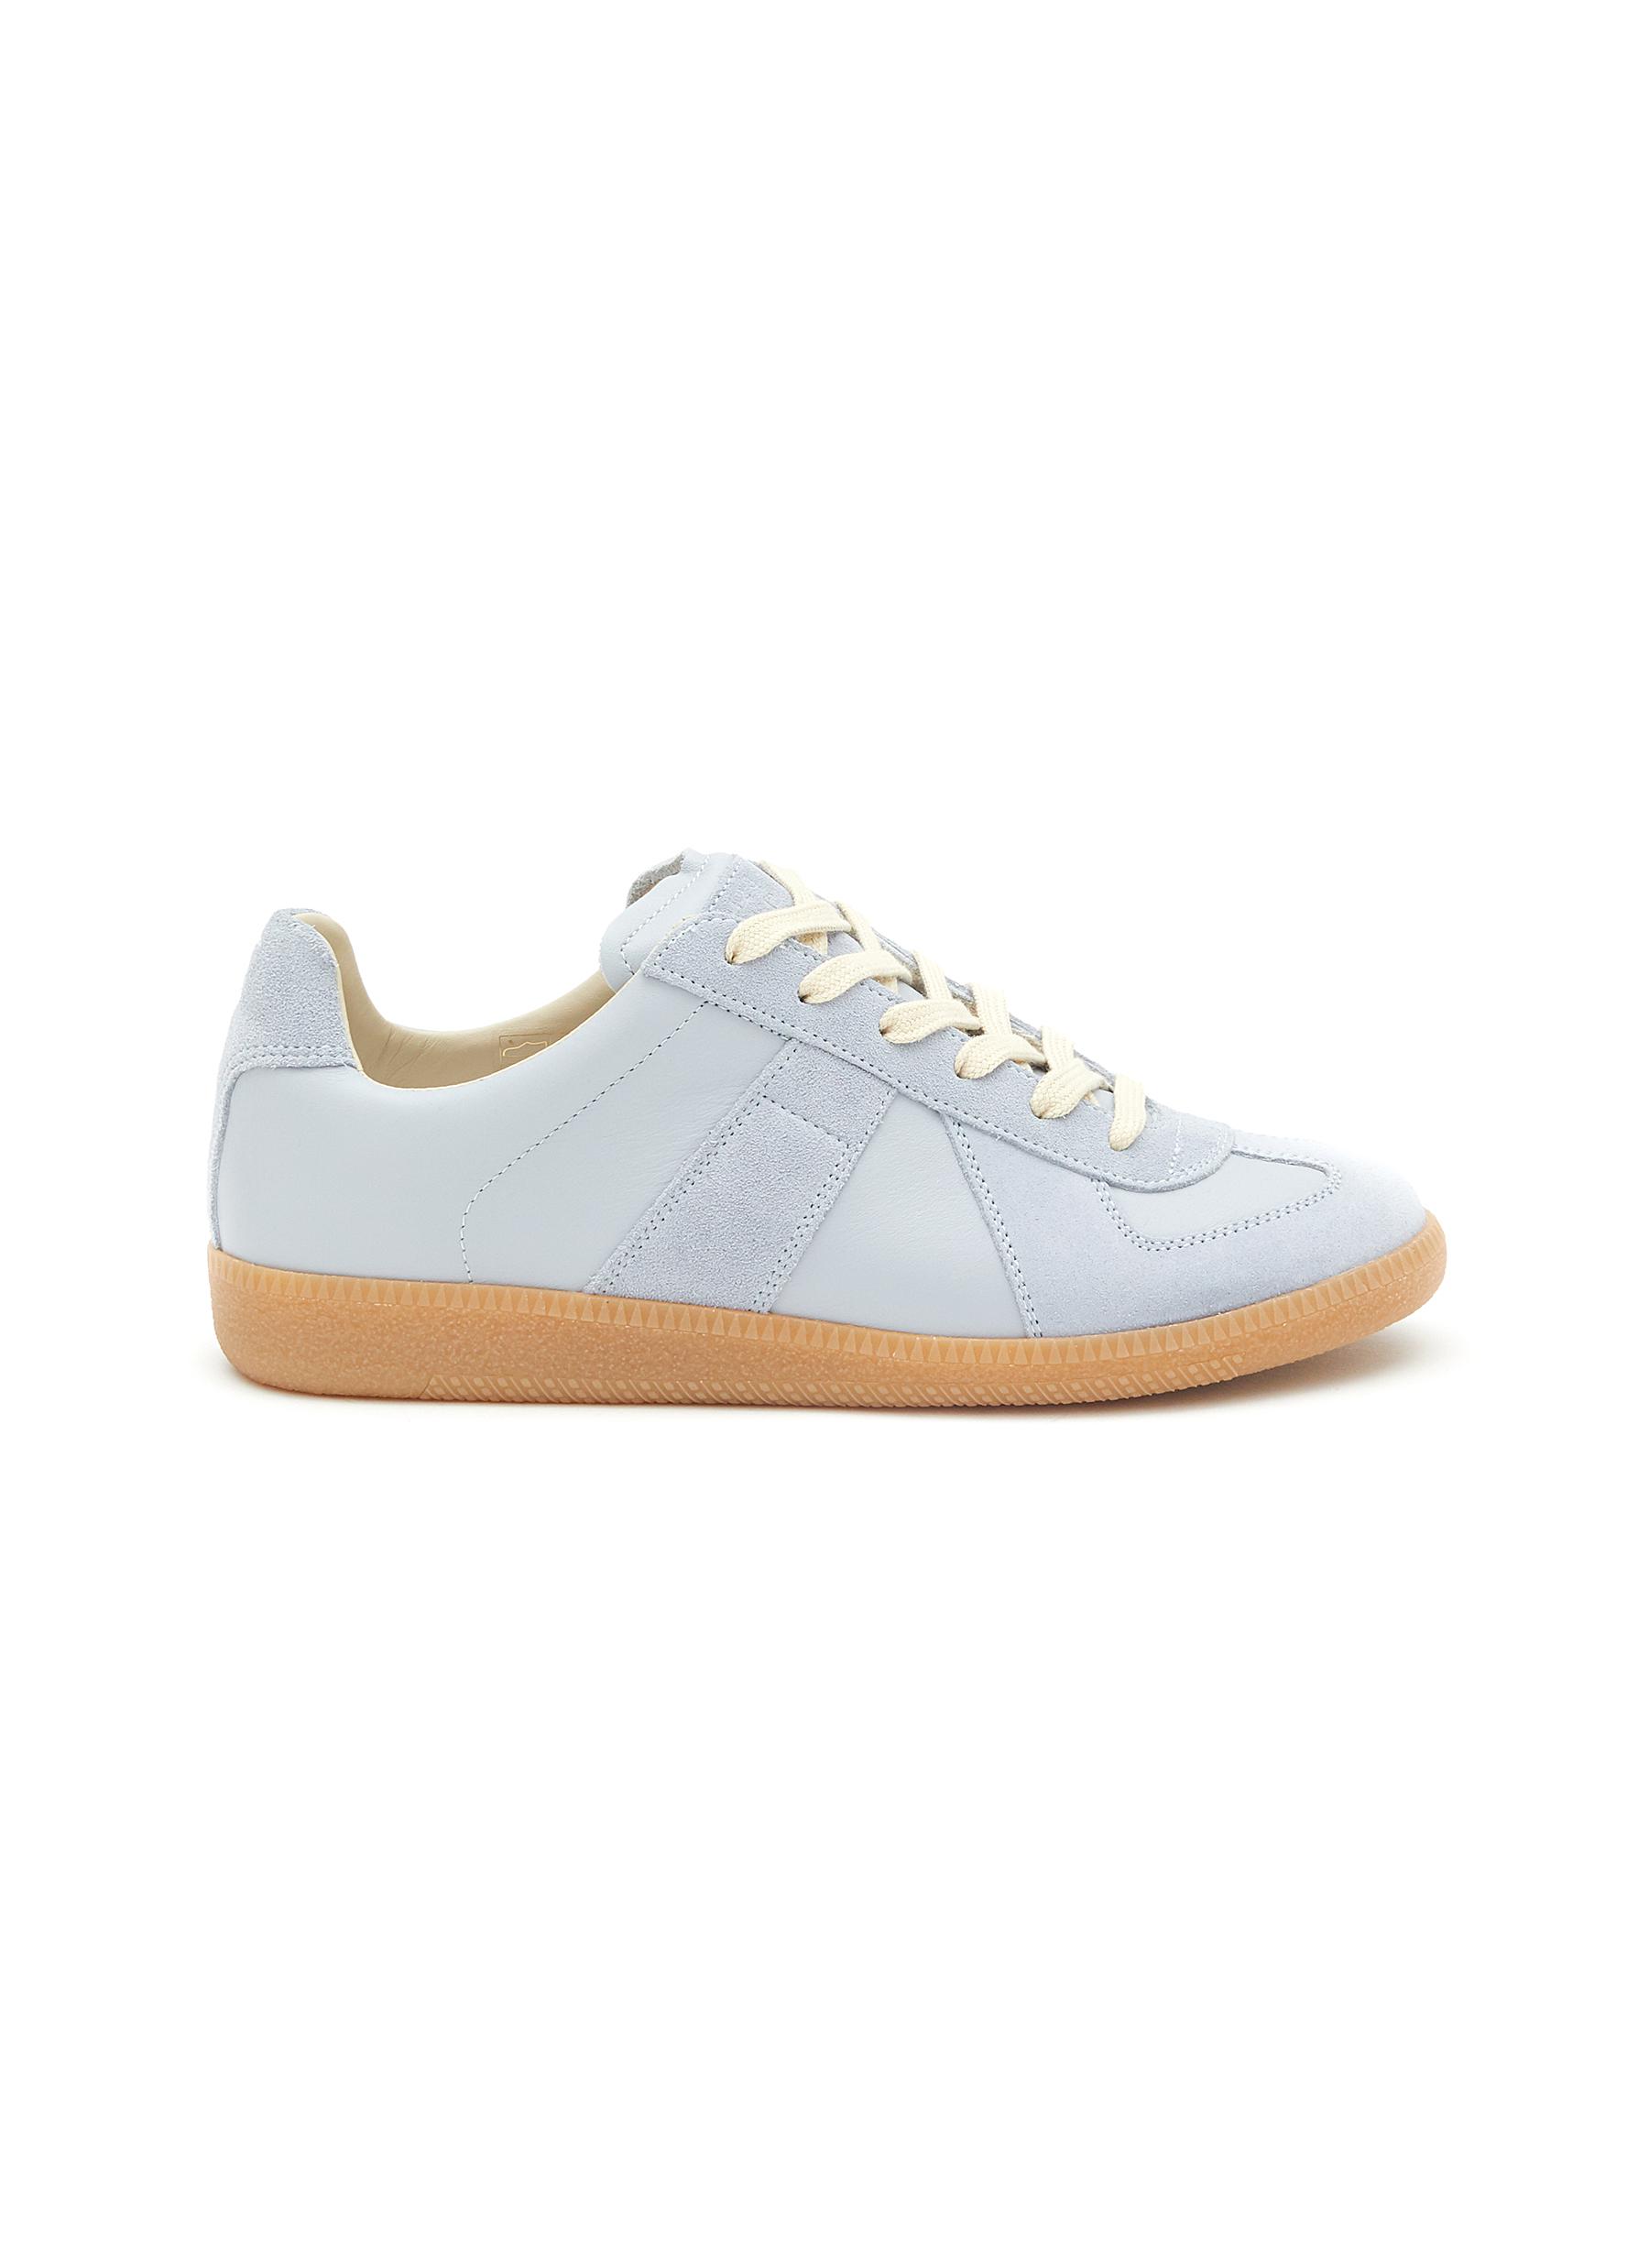 MAISON MARGIELA ‘REPLICA' SUEDE LEATHER LOW TOP SNEAKERS